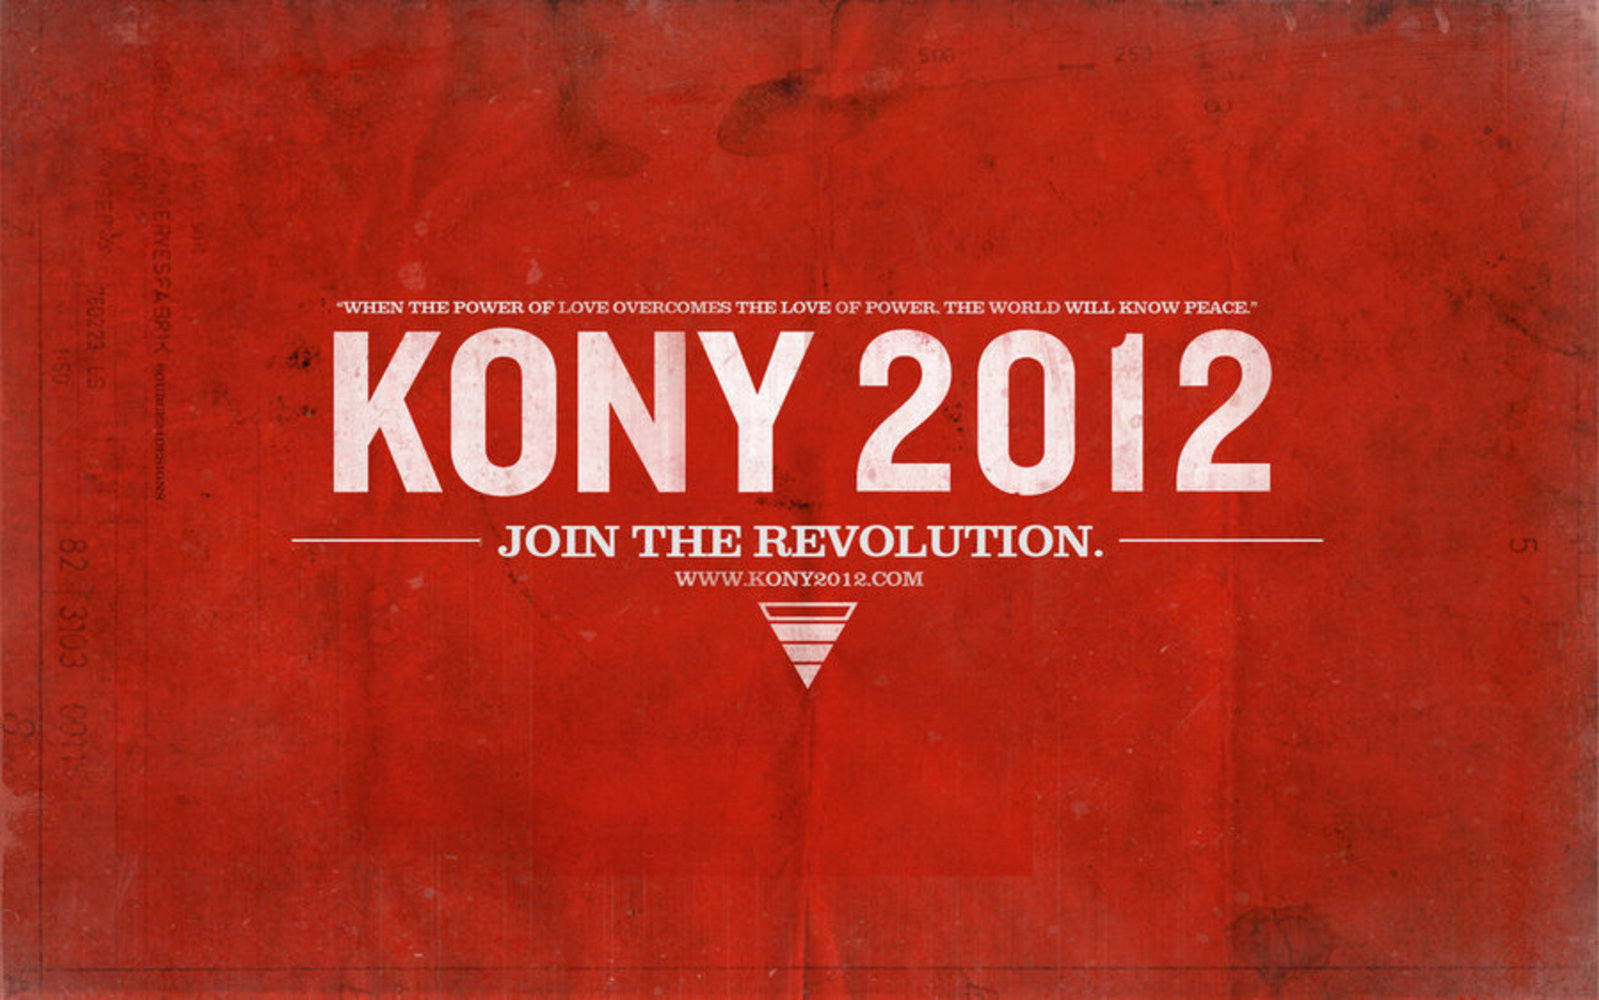 Kony 2012 wallpapers by angelmaker666 d4s2s90 %281%29.thumb